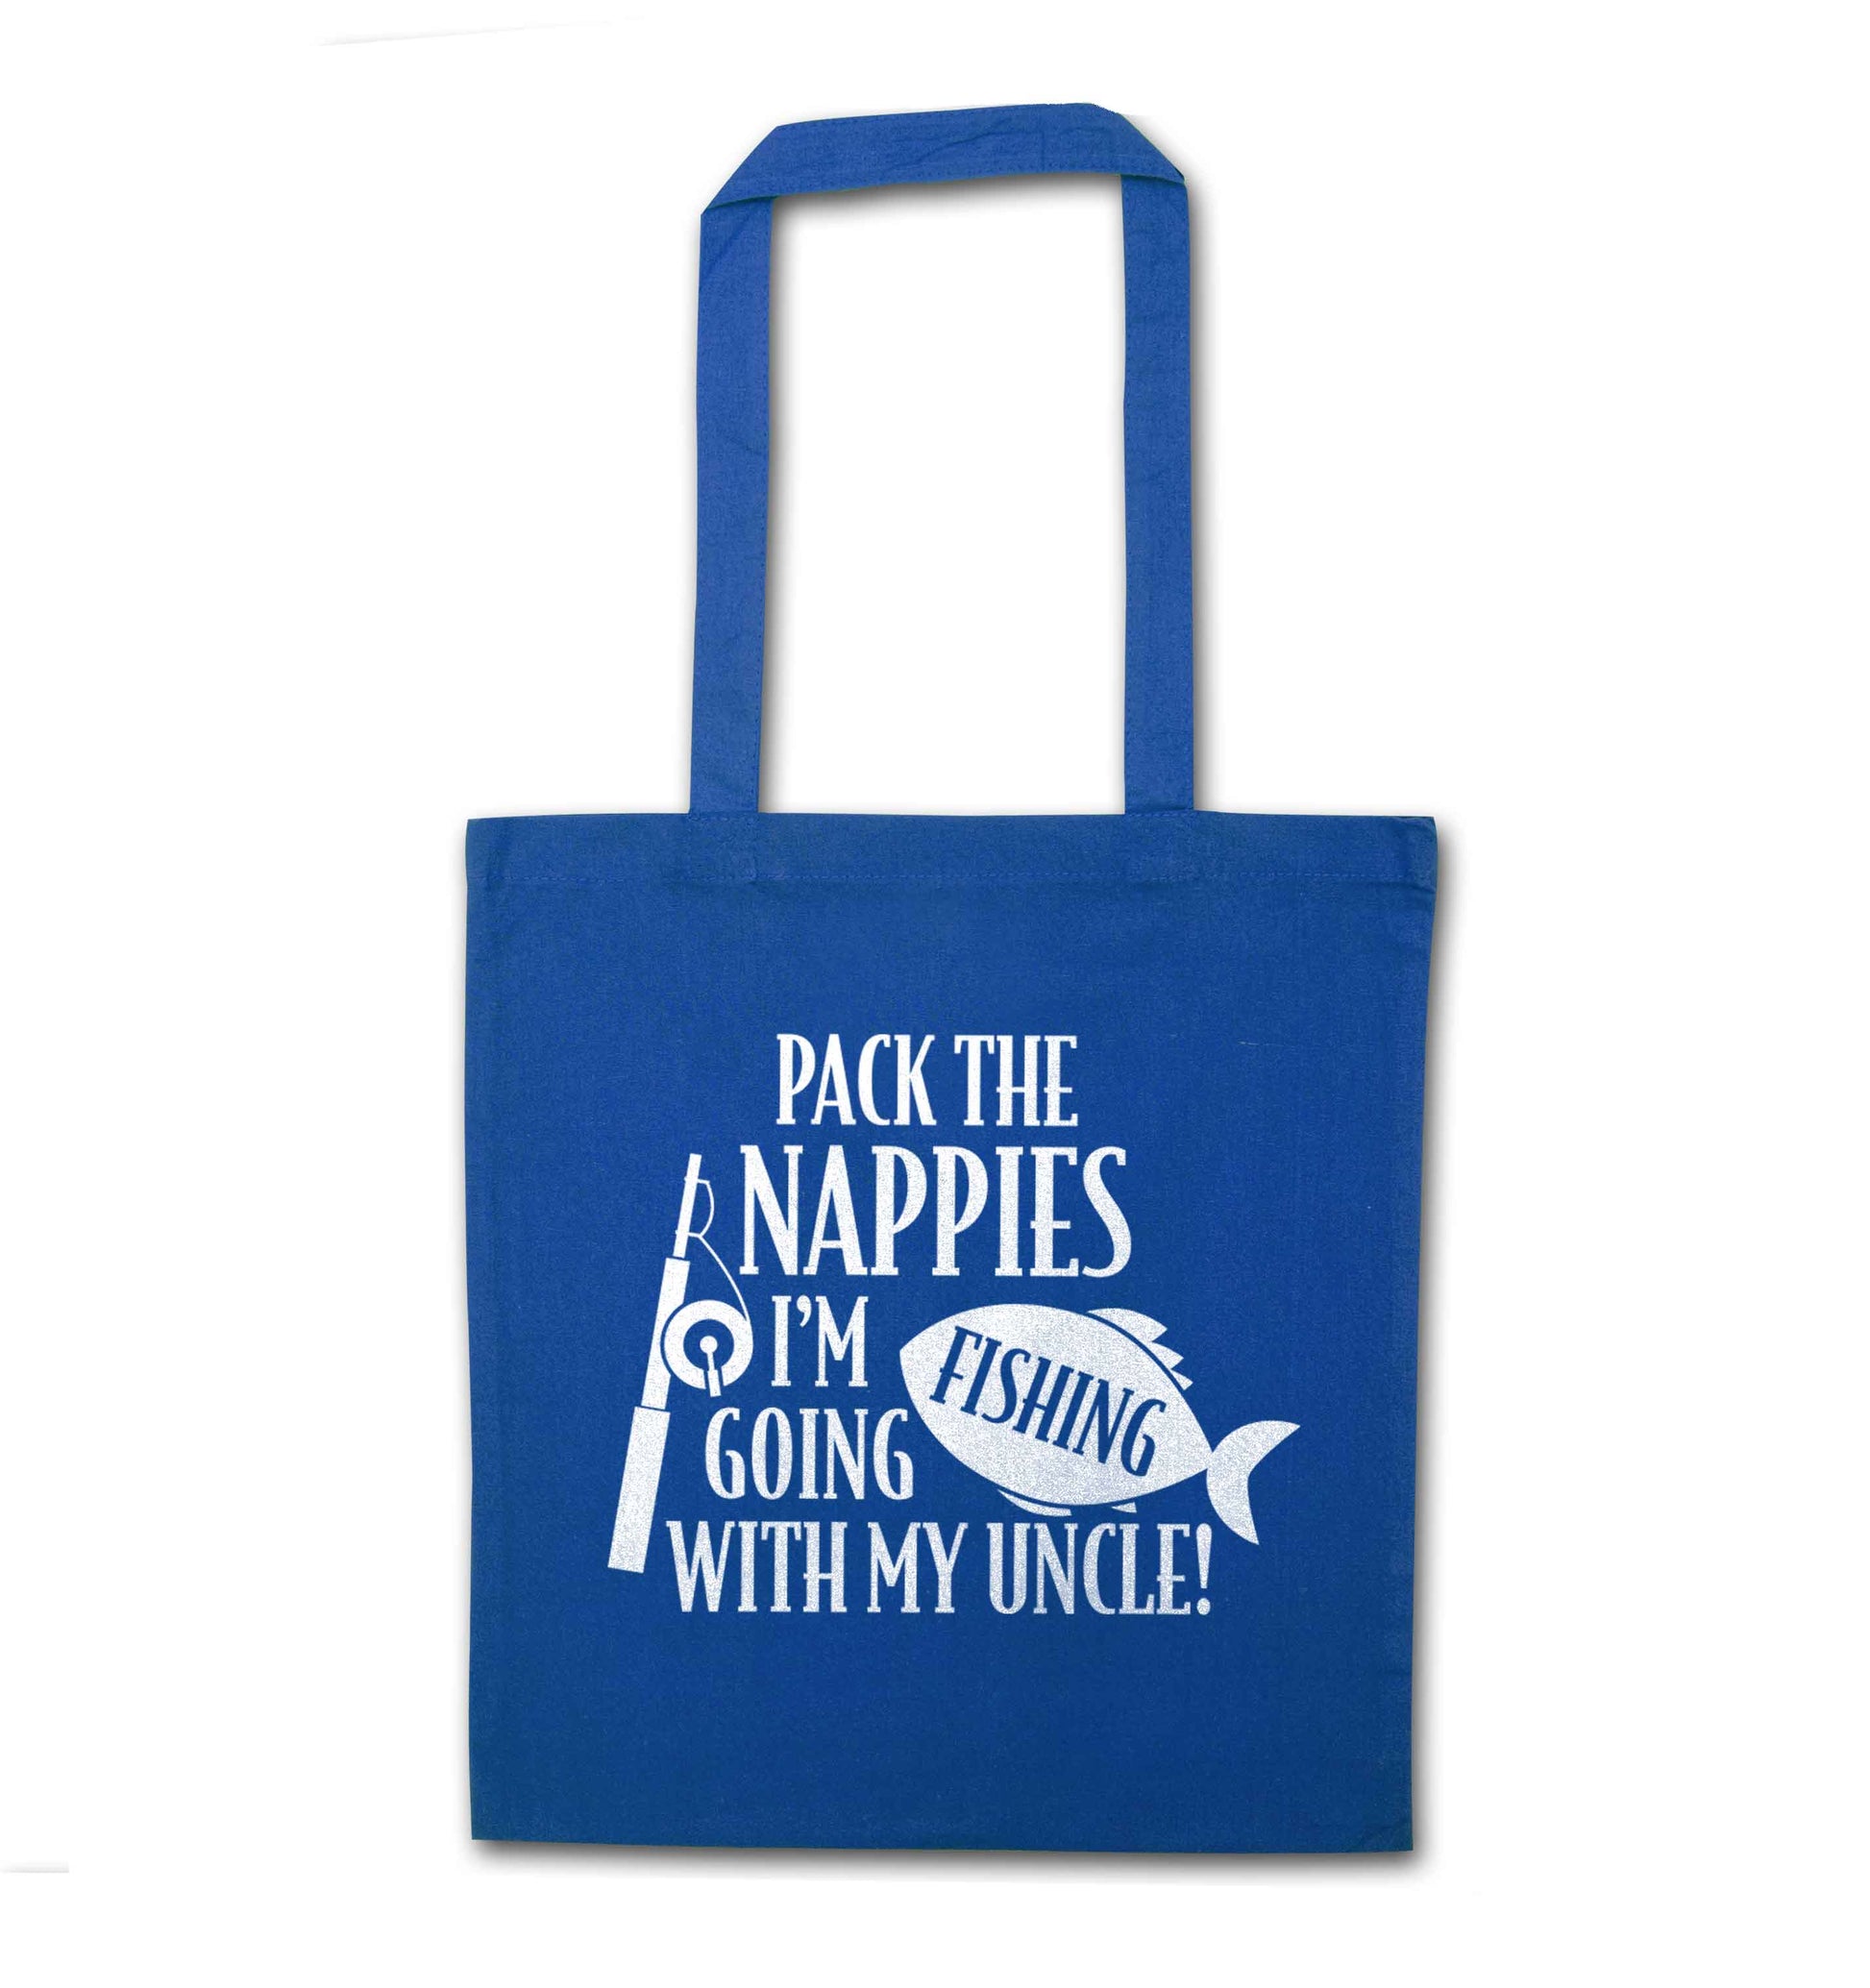 Pack the nappies I'm going fishing with my Uncle blue tote bag